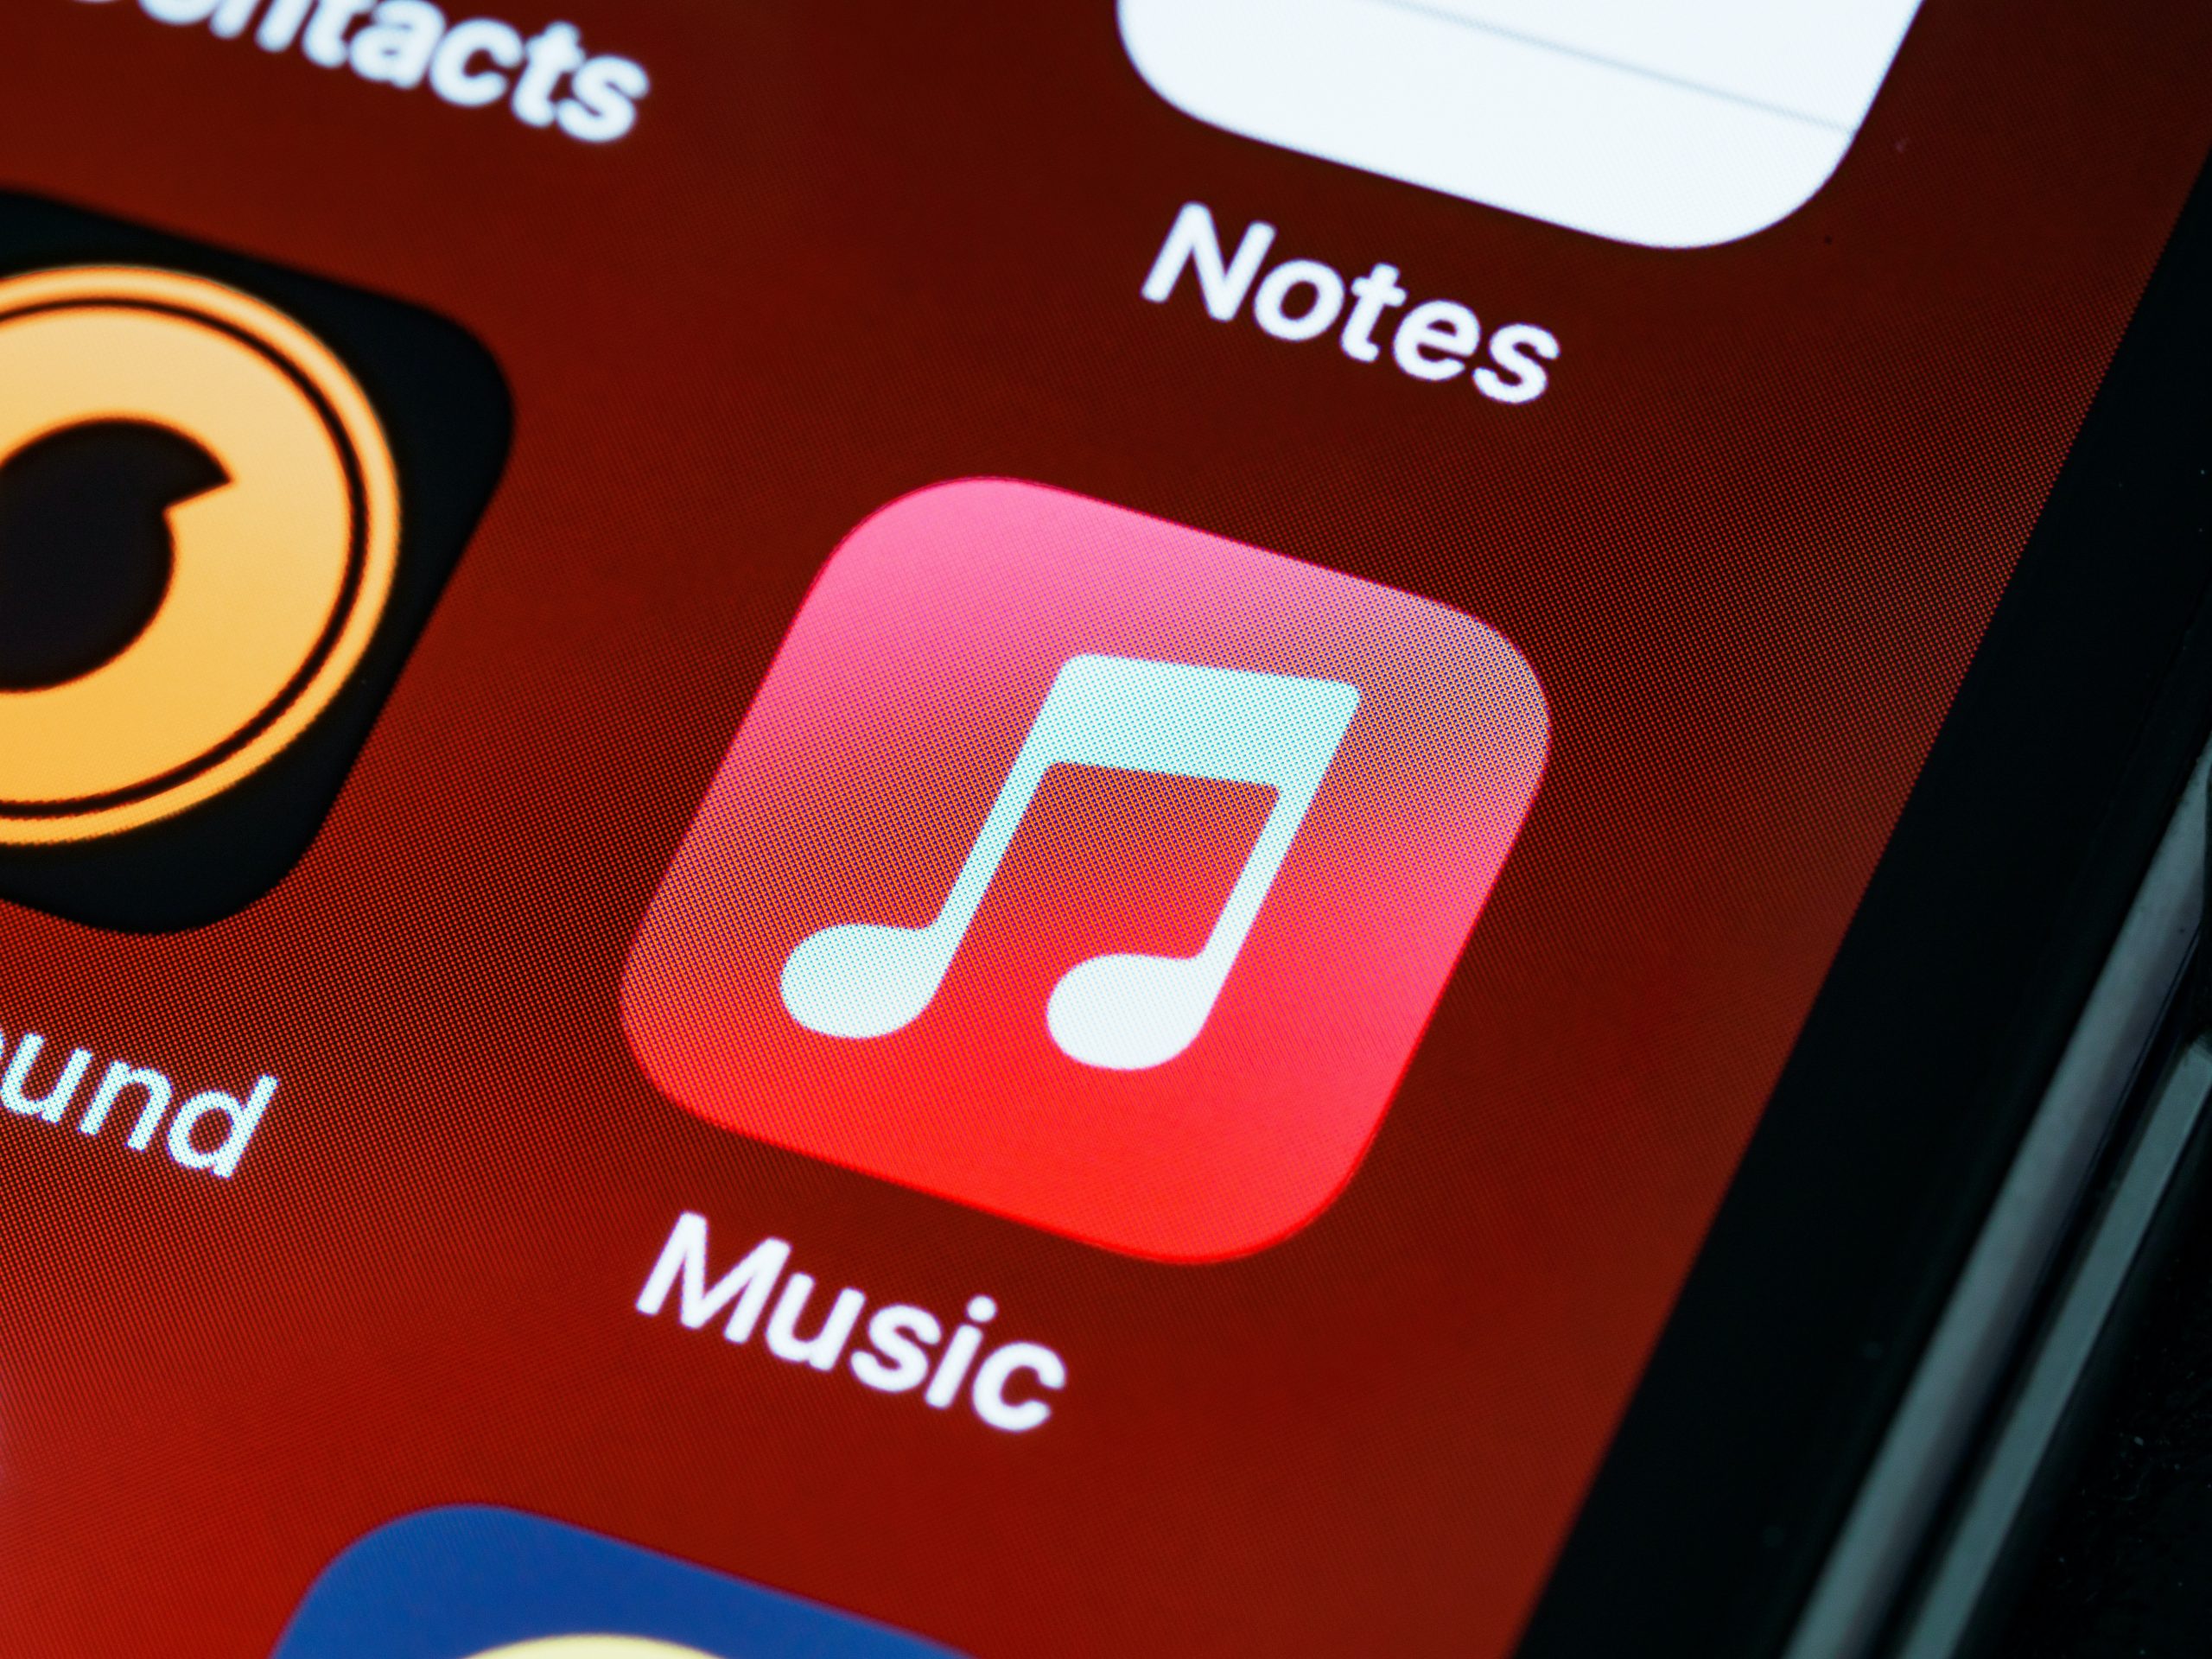 How To Download Music In 2022 - An image of a music icon on an iPhone